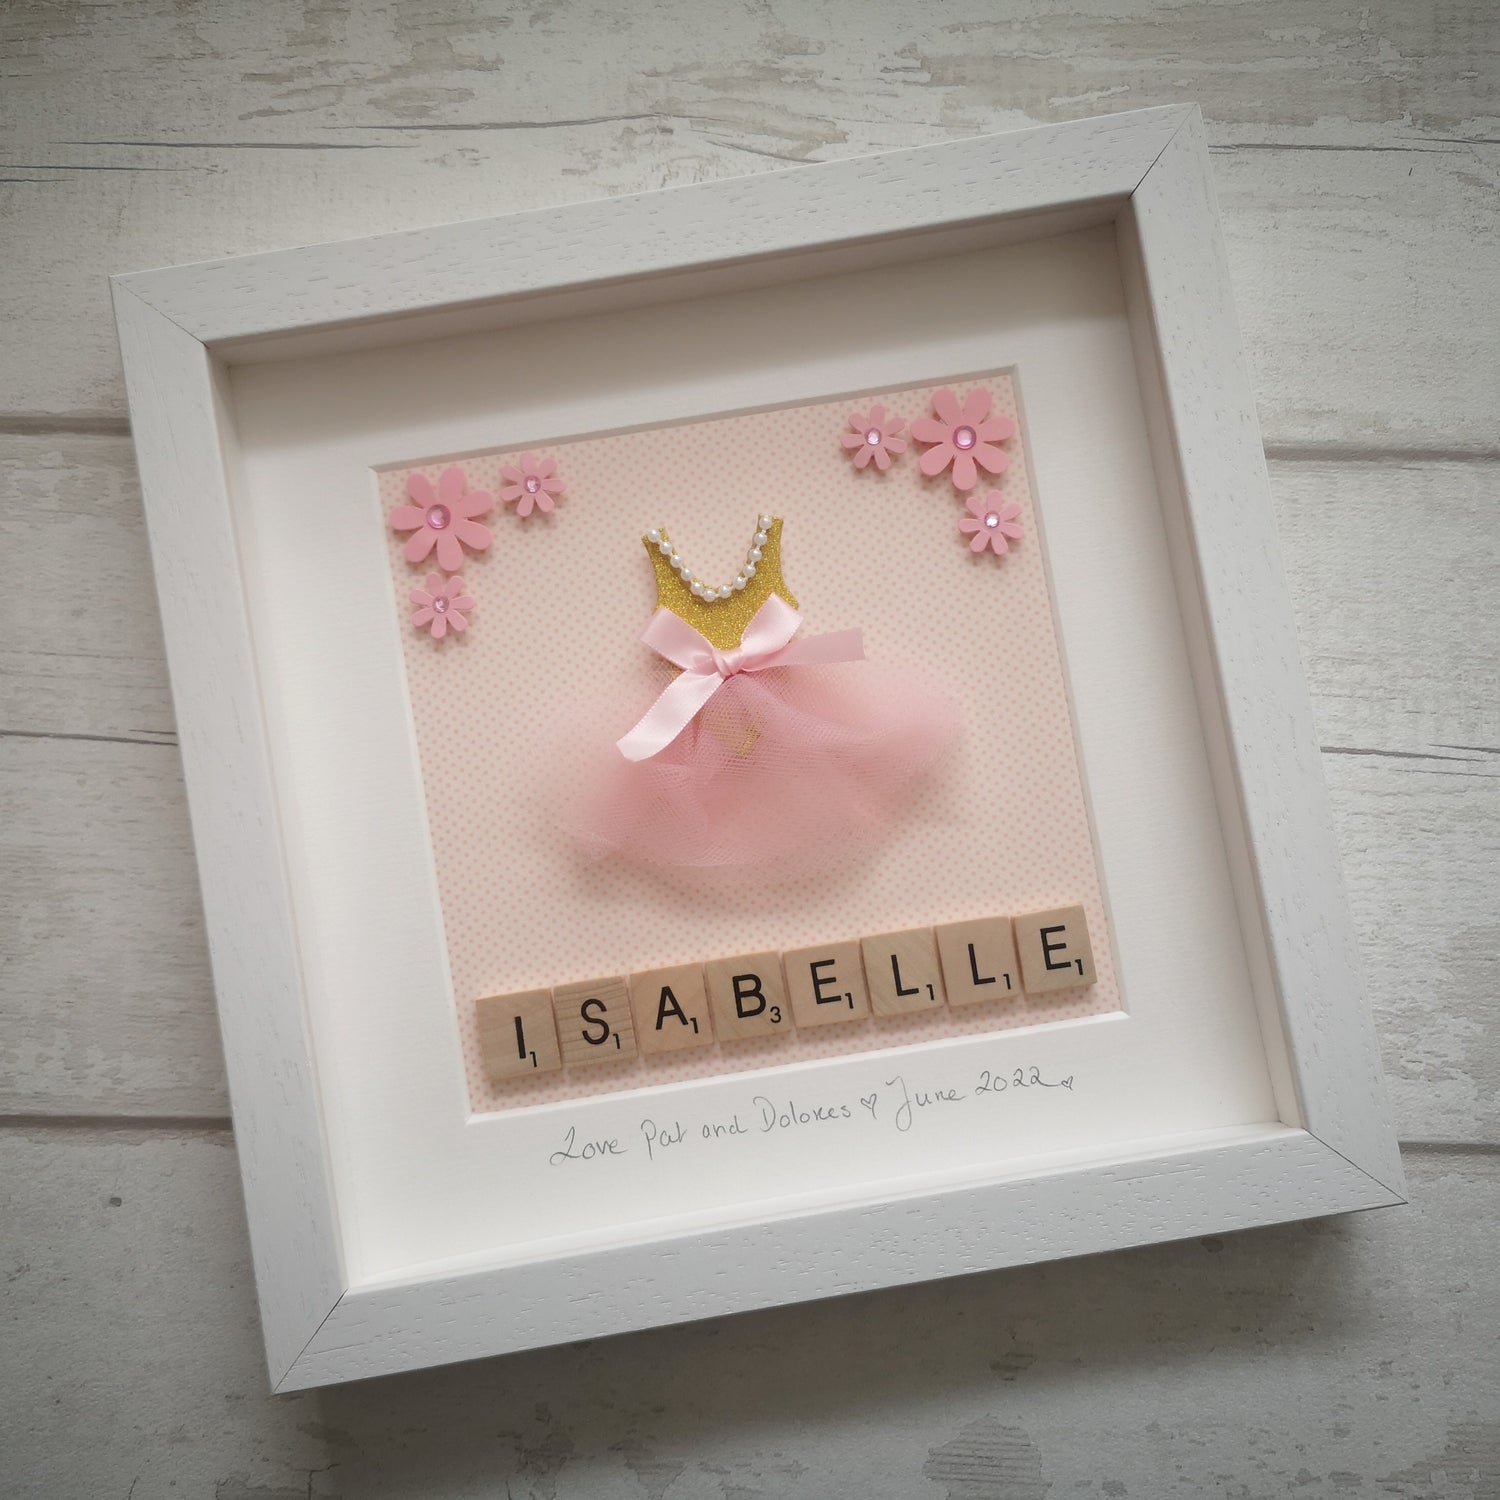 Personalised Girls Scrabble picture with pink gold dress above the tiles, in a handmade wooden 25x25cm deep box frame